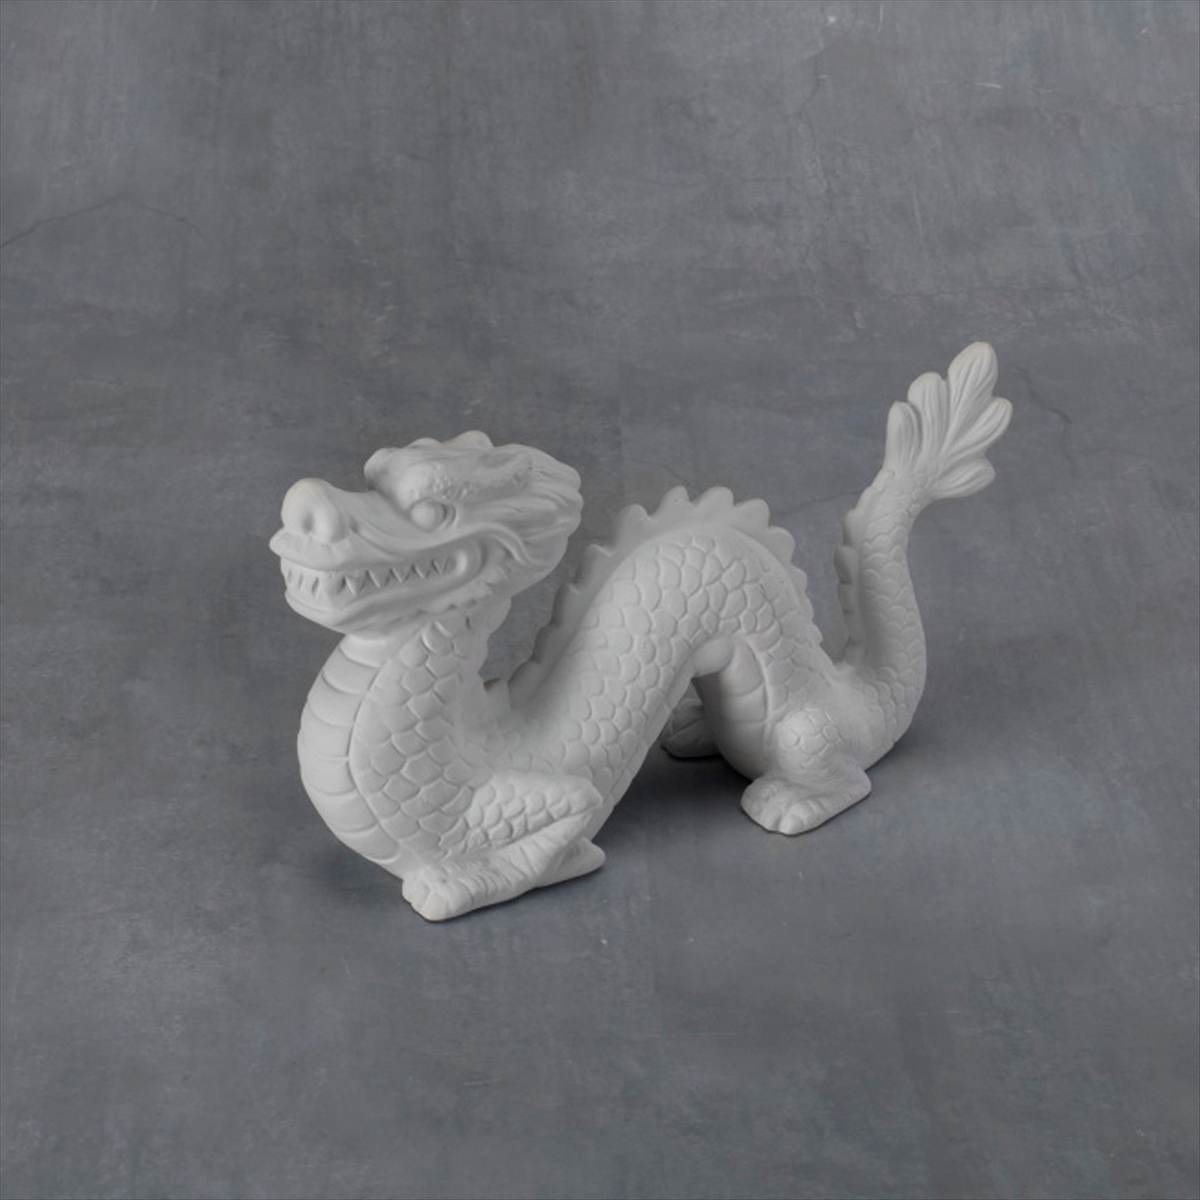 Duncan 38427 Bisque Chinese Dragon